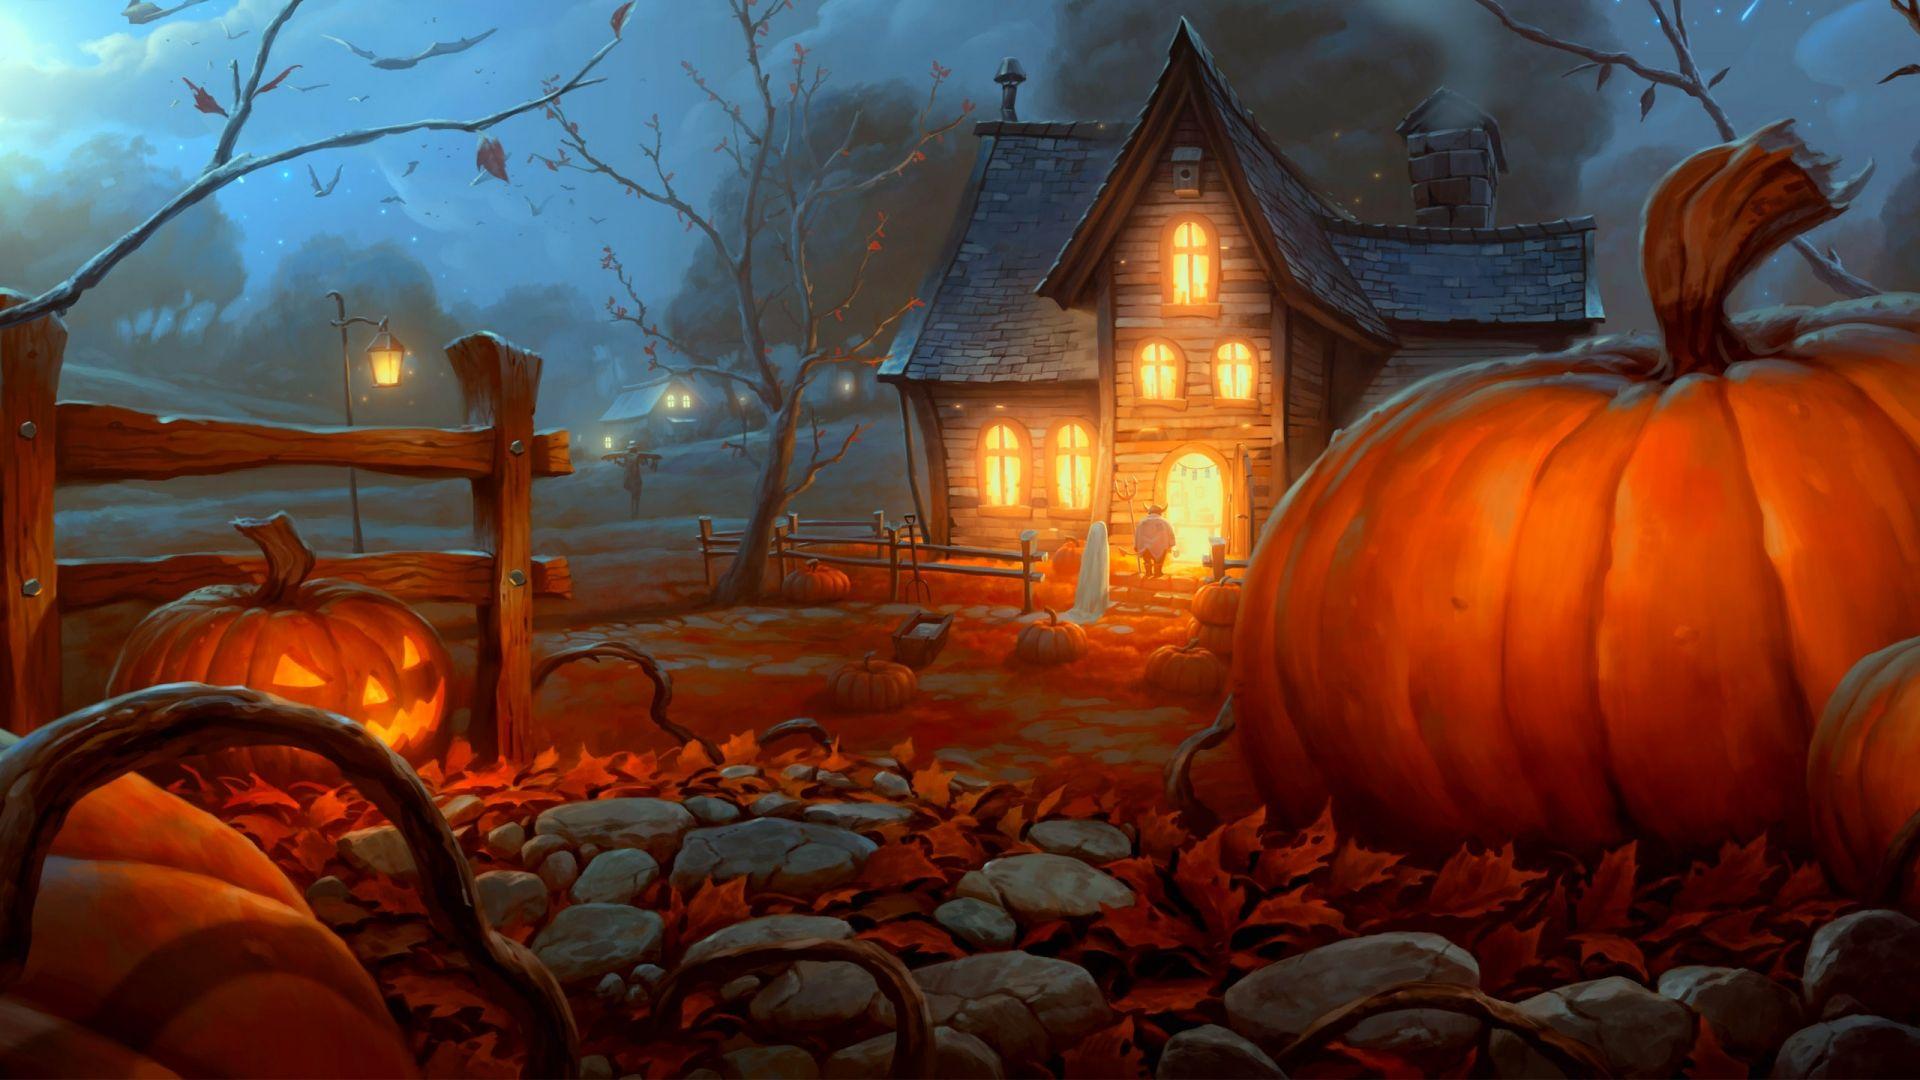 Haunted House Halloween Wallpaper. Join Our Mailing List